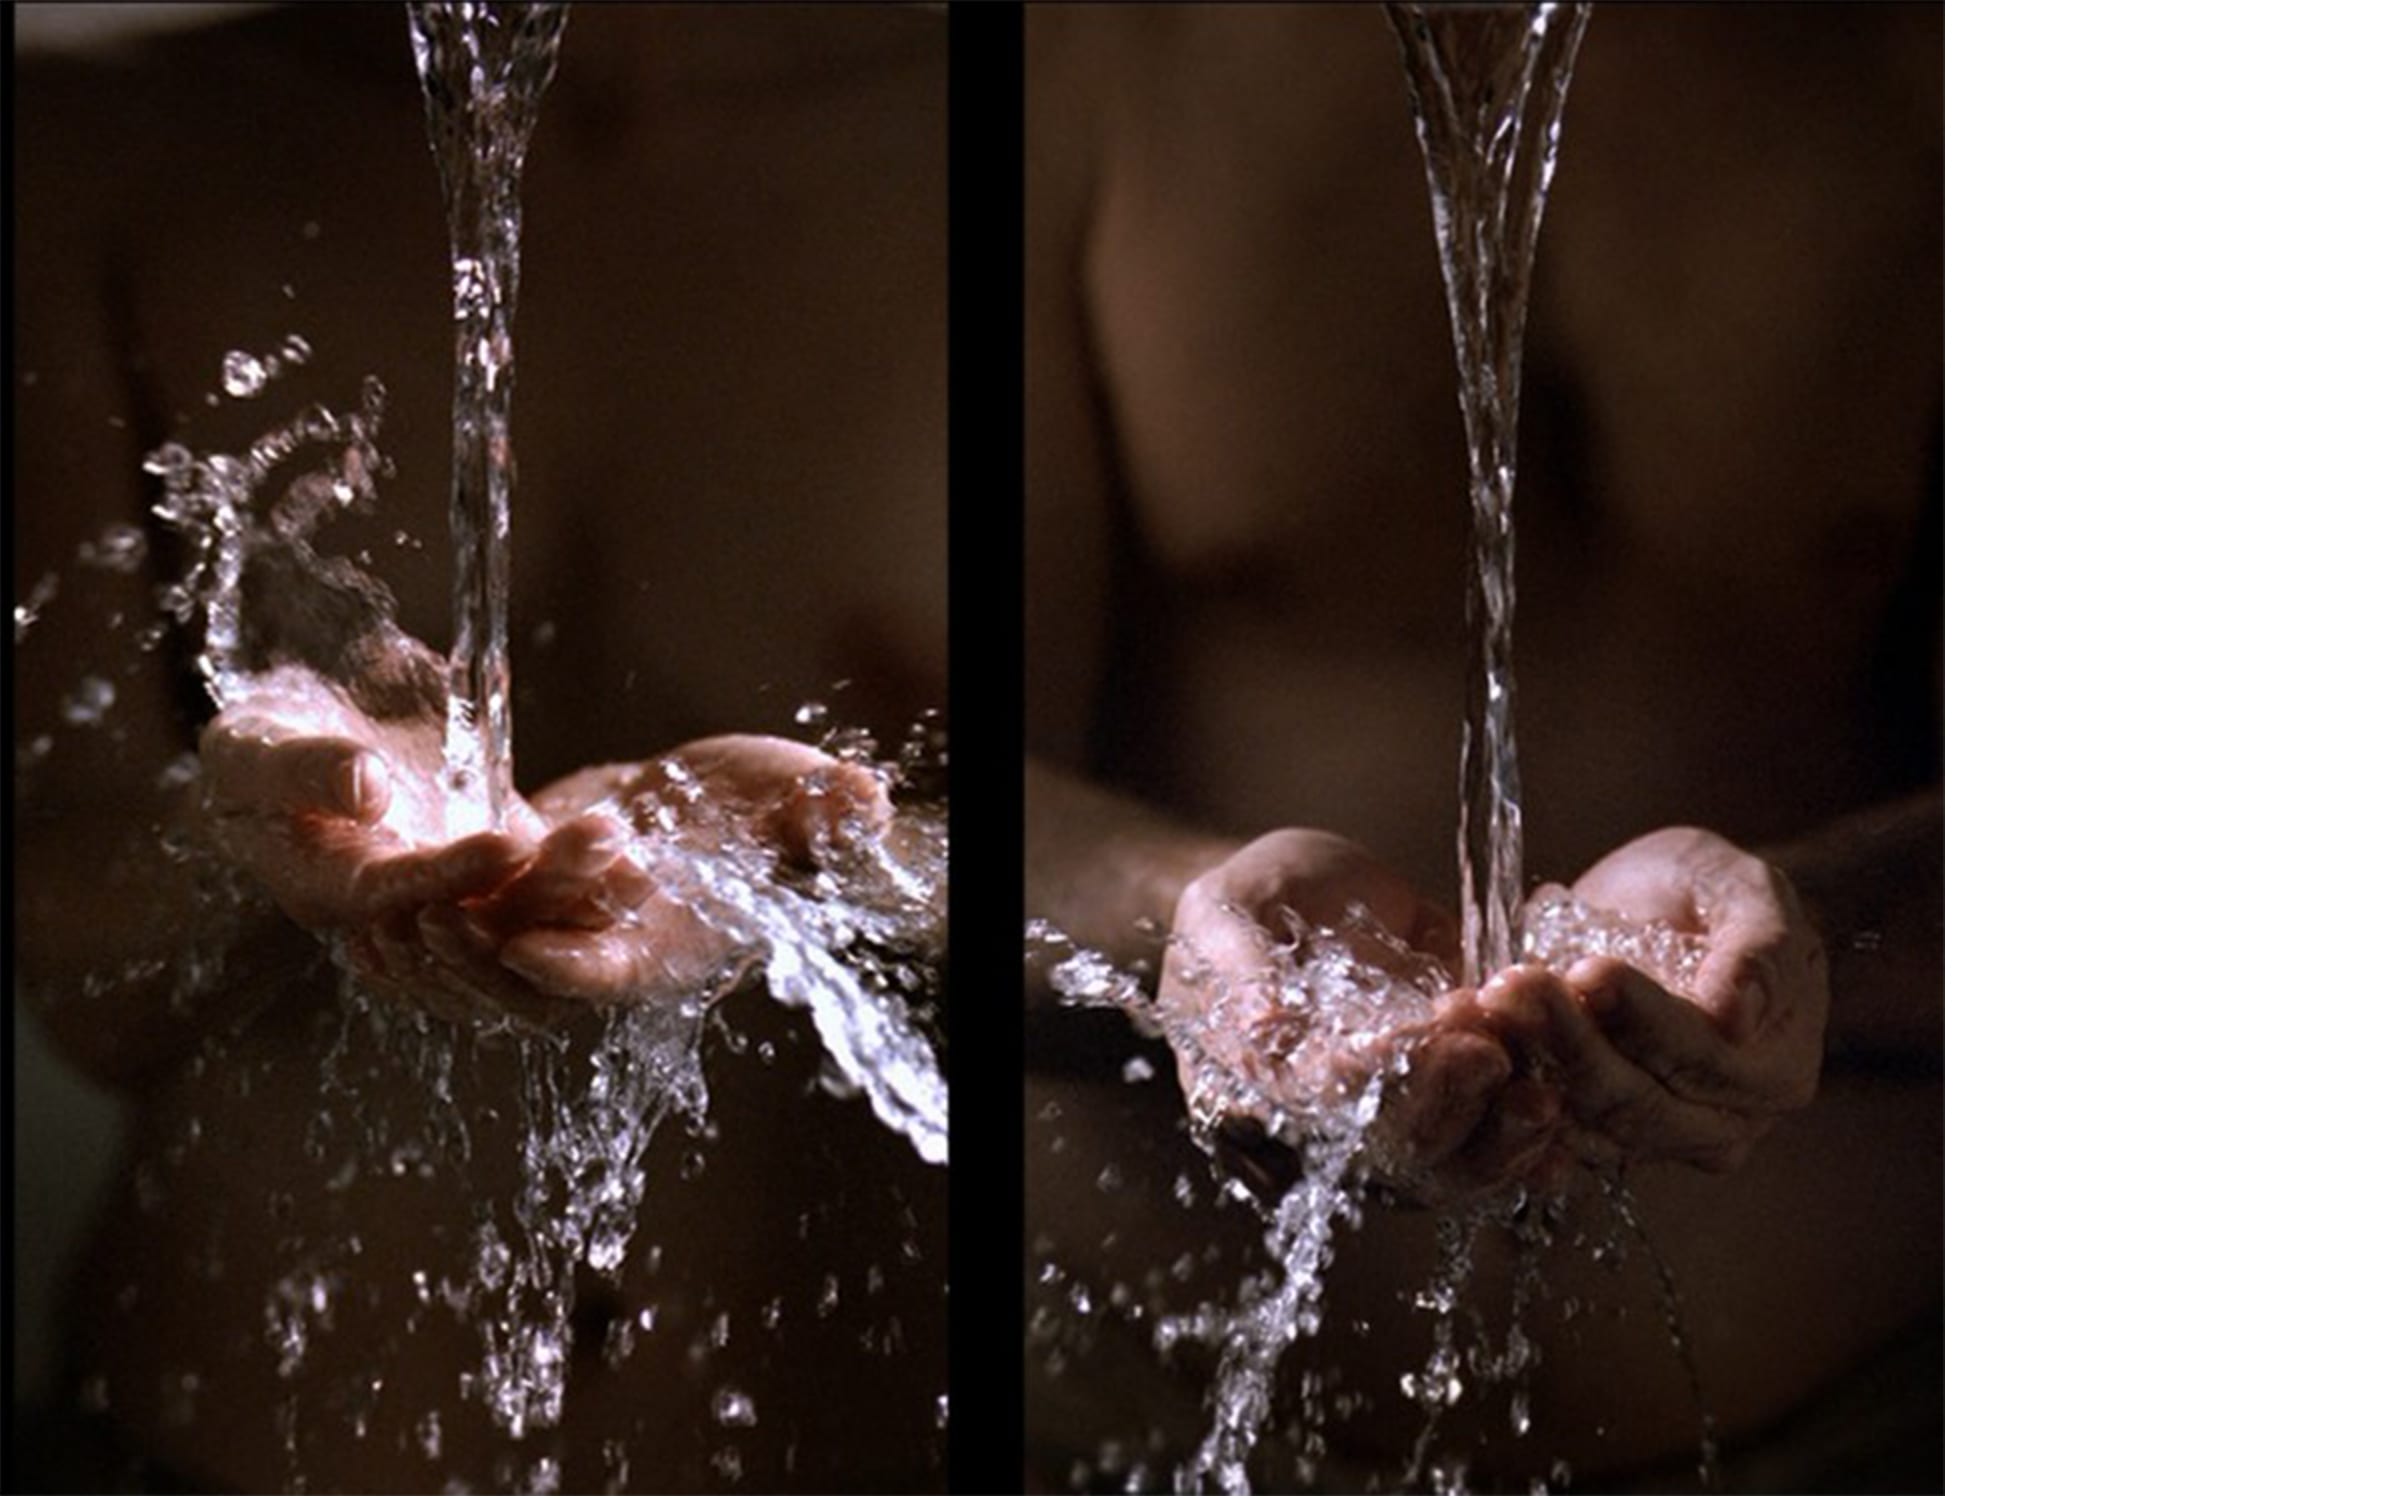 Bill Viola, Ablutions, 2005. Courtesy of the artist and James Cohan Gallery, New York City.